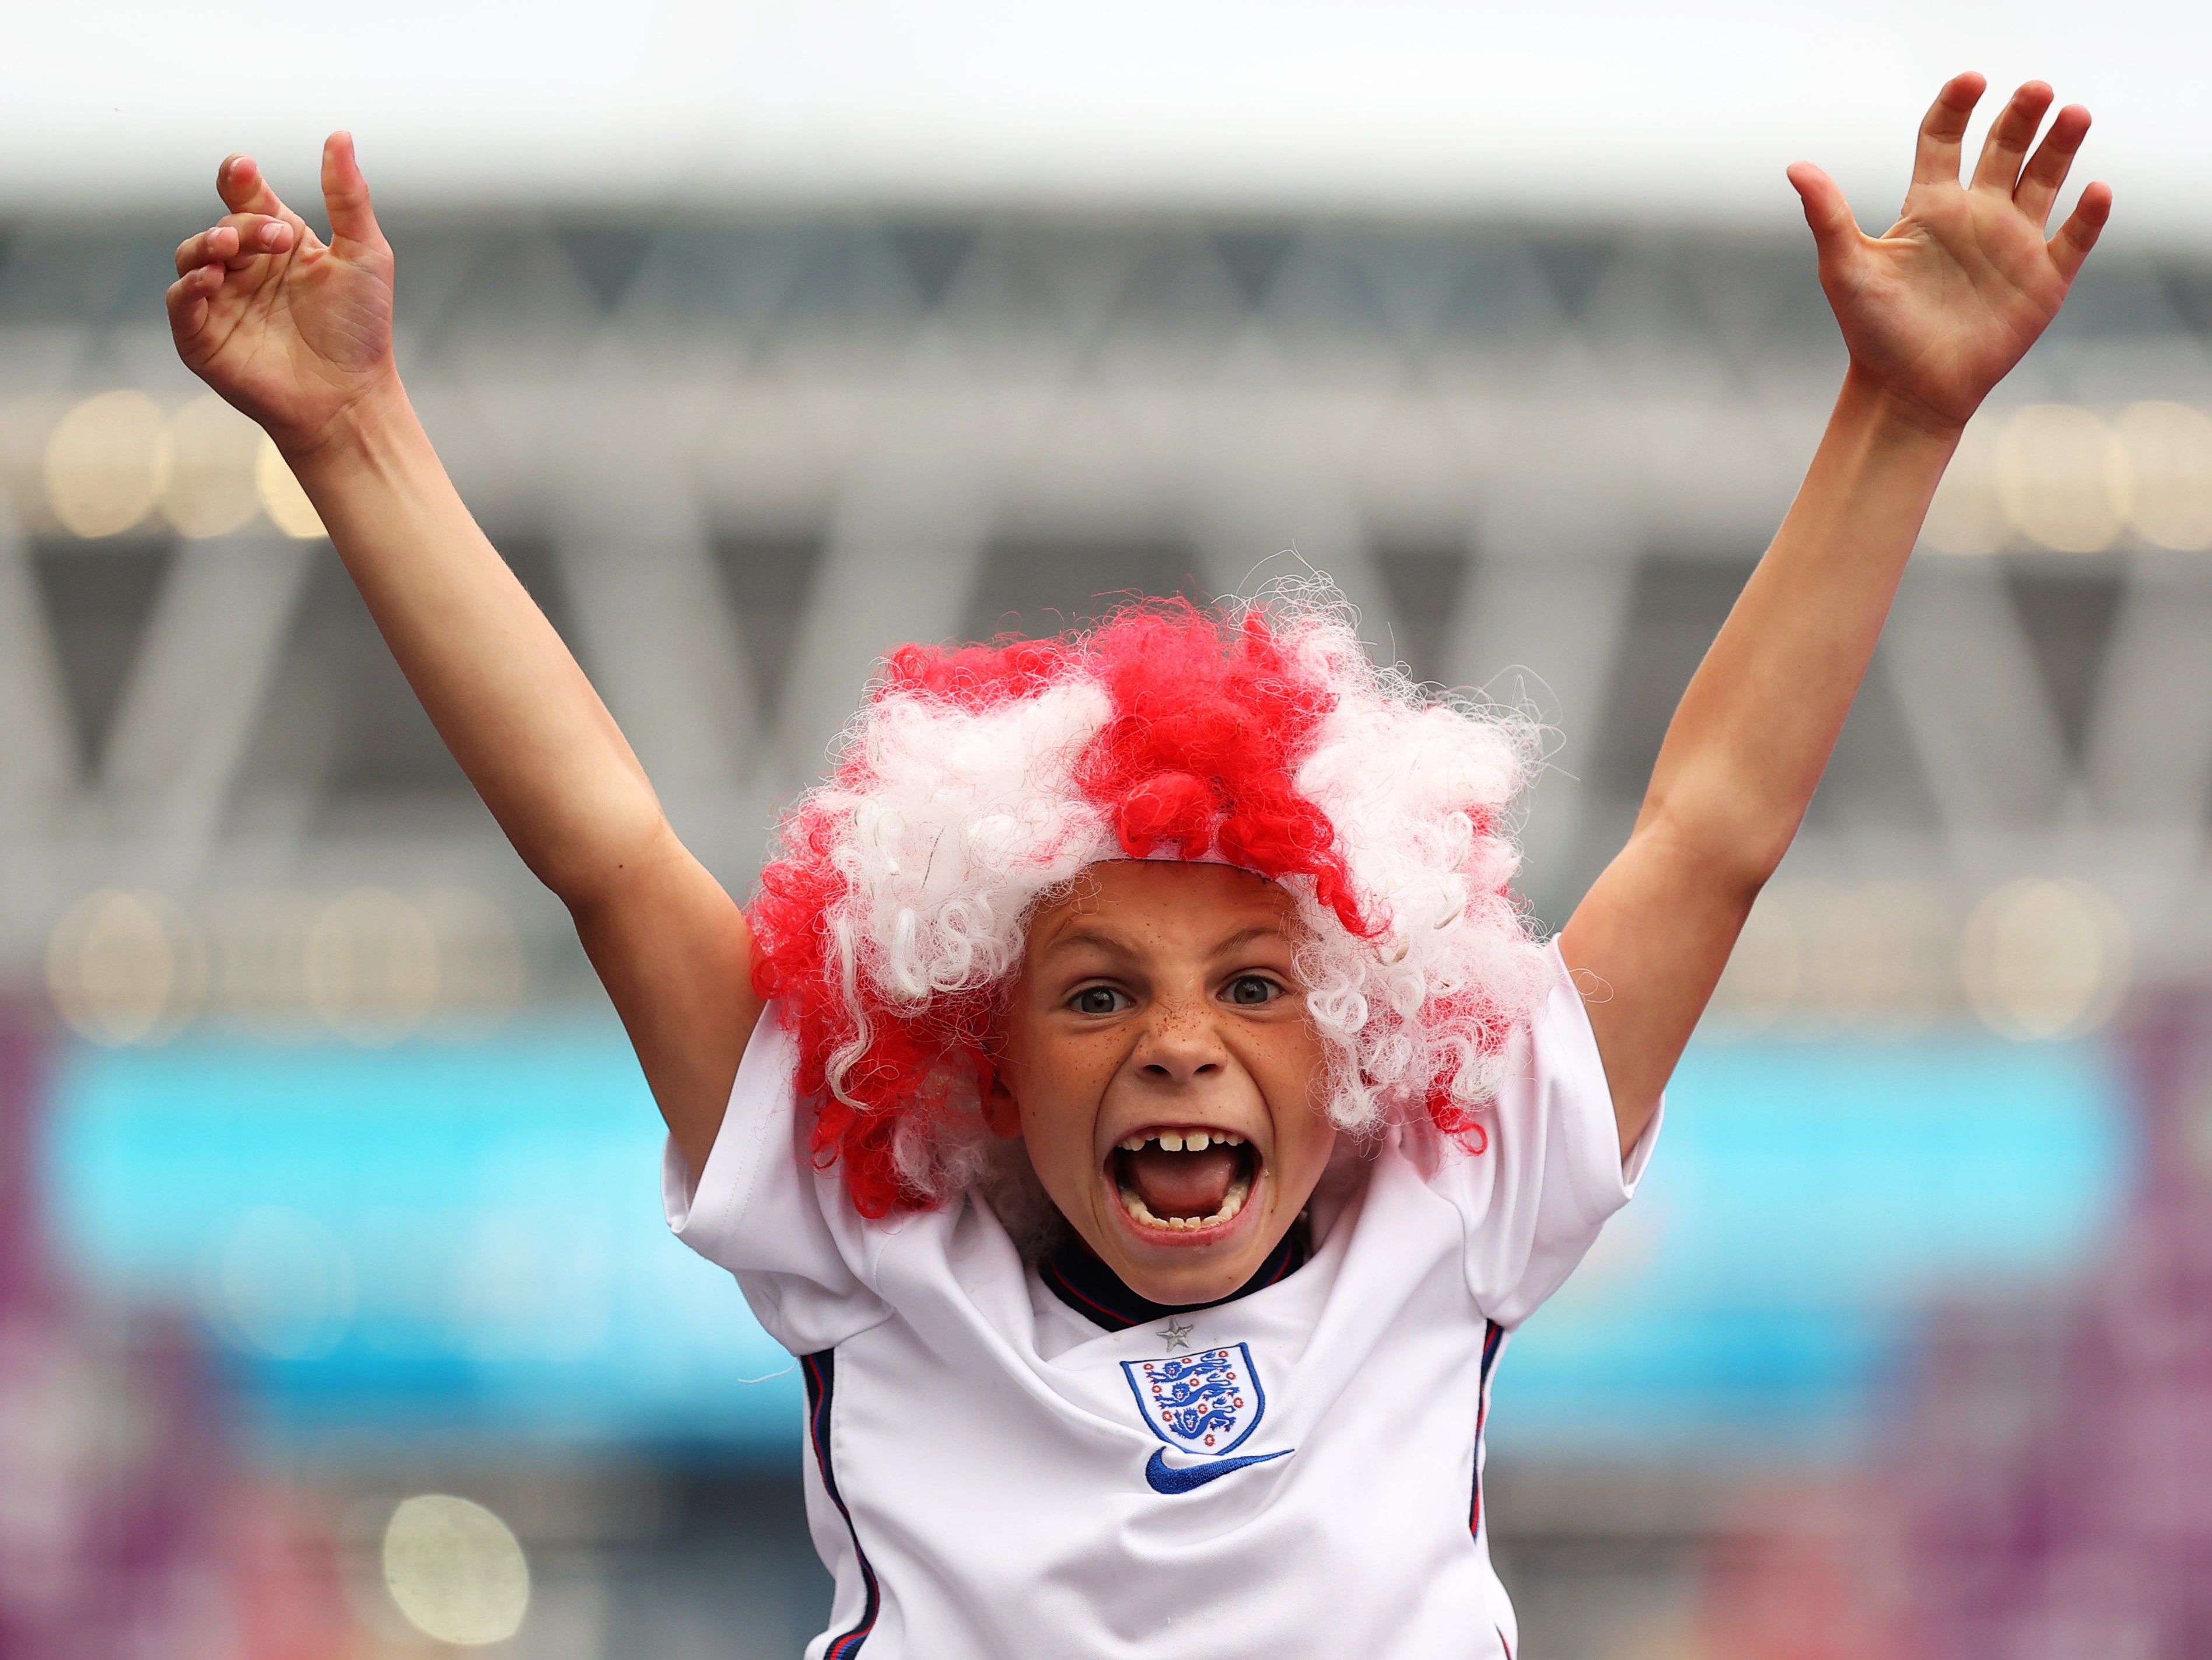 : A fan of England wearing a wig shows their support along Wembley Way prior to the UEFA Euro 2020 Championship Final